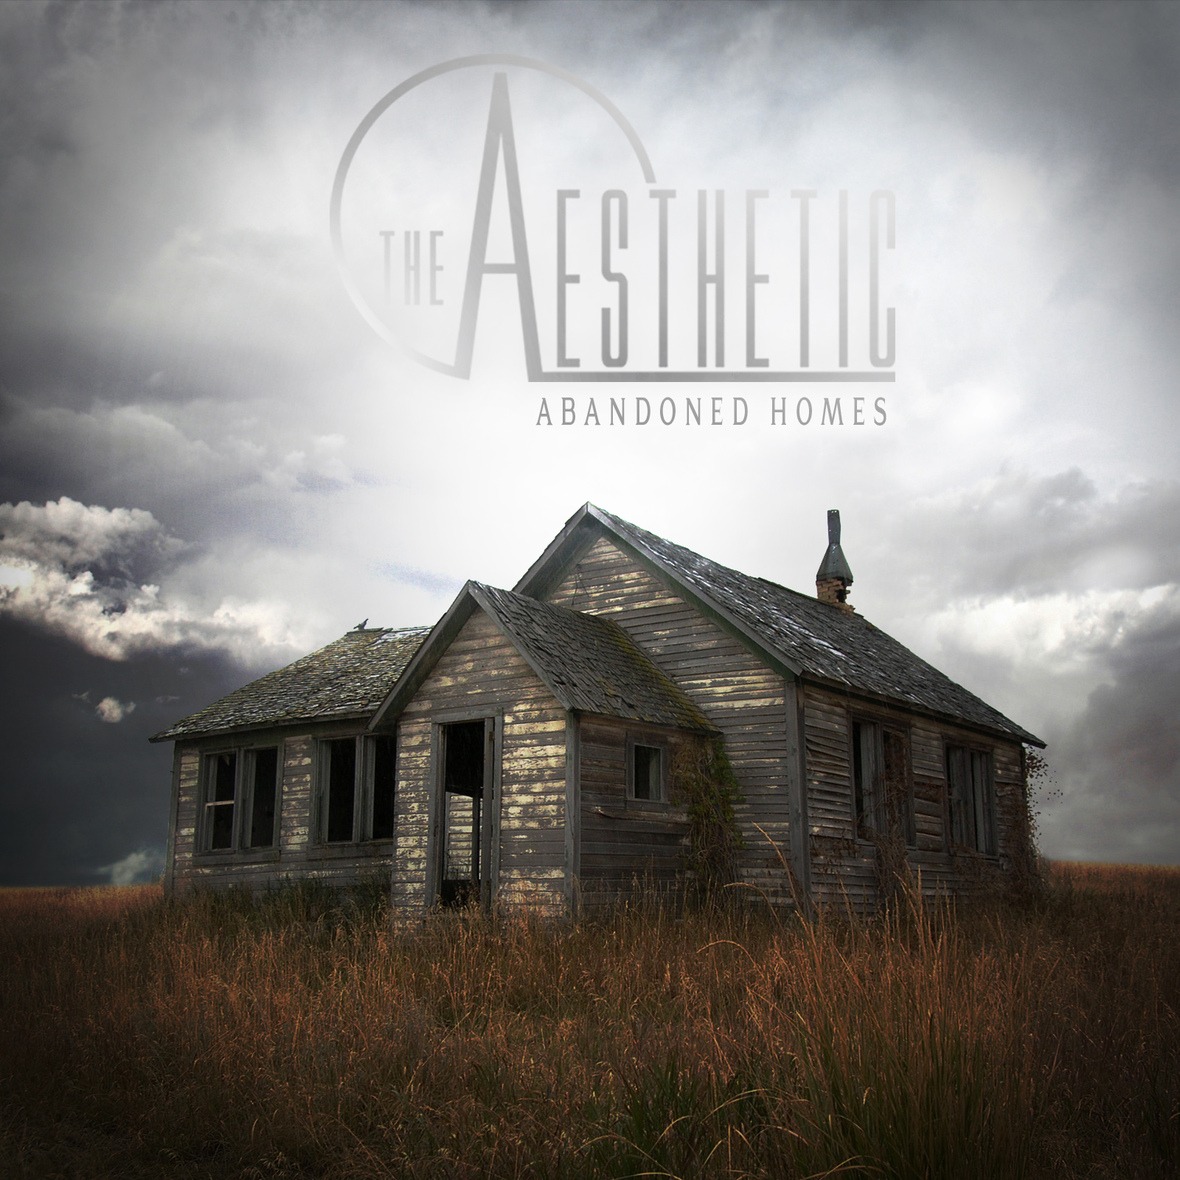 The Aesthetic Release "Abandoned Homes" EP